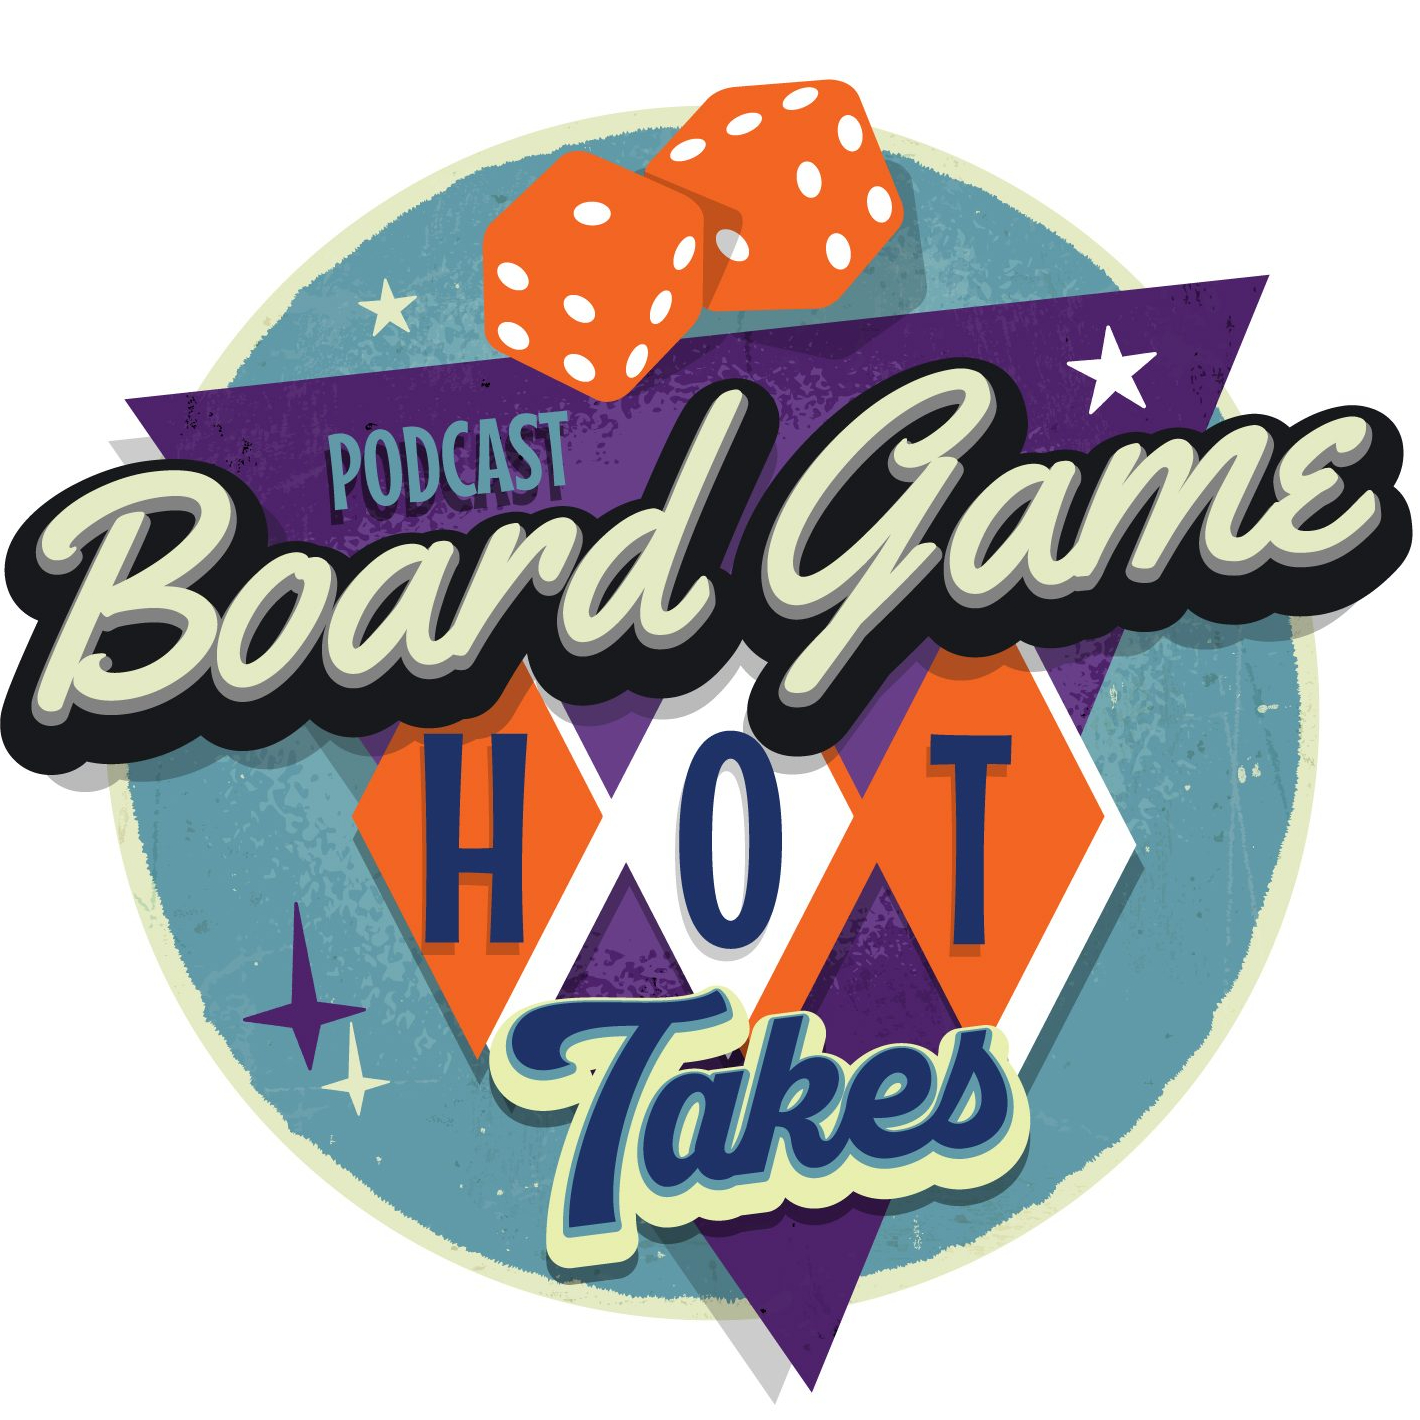 Board Game Hot Takes Podcast